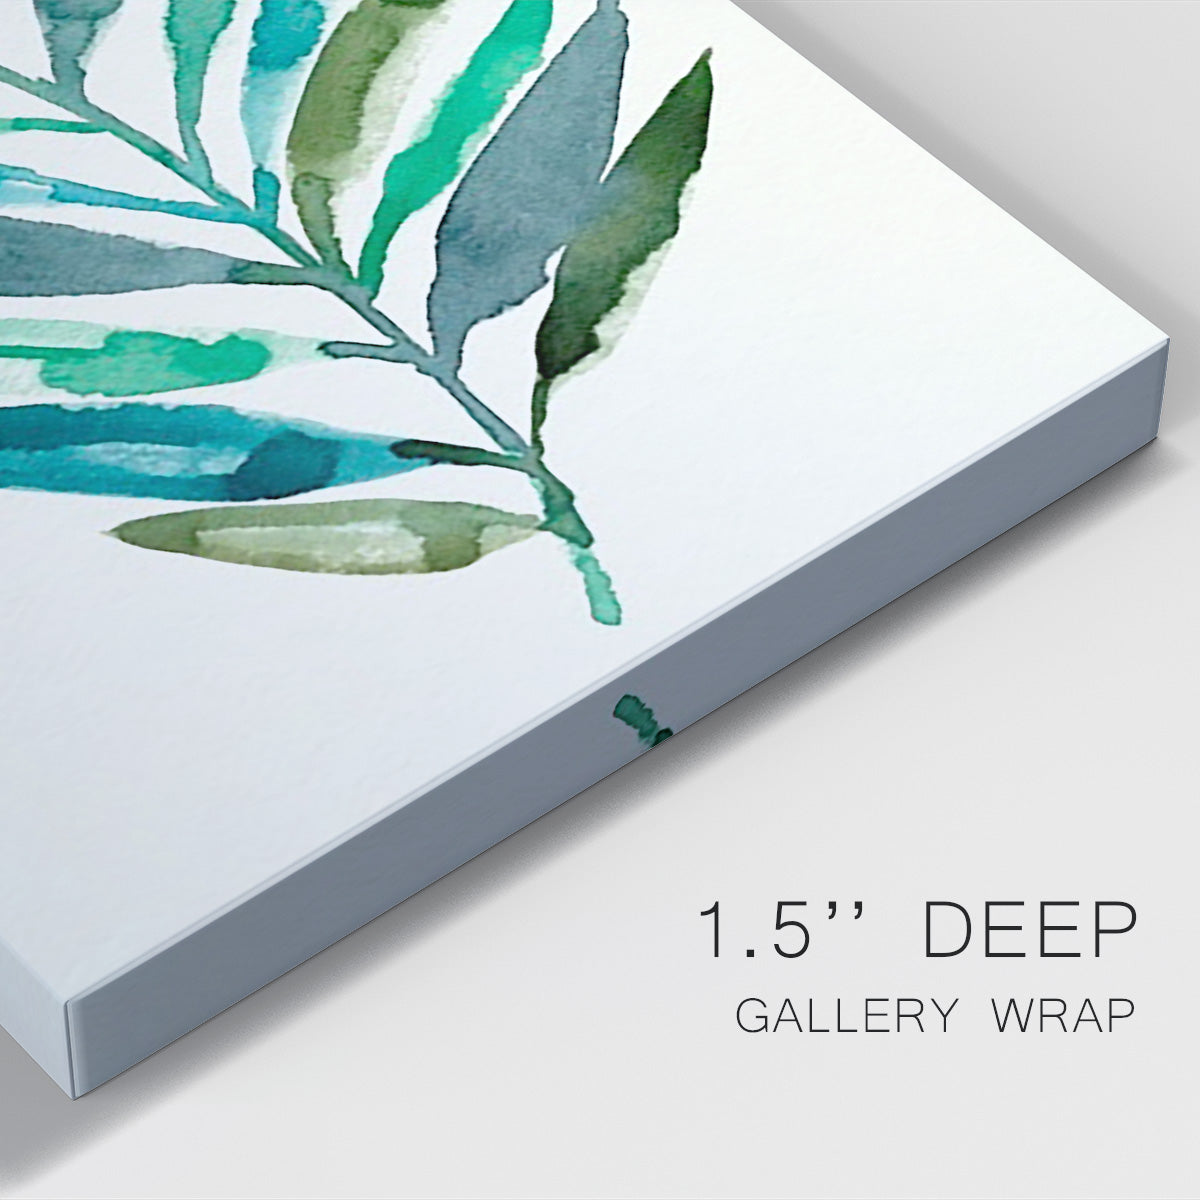 Palm Frond Flow IV Premium Gallery Wrapped Canvas - Ready to Hang